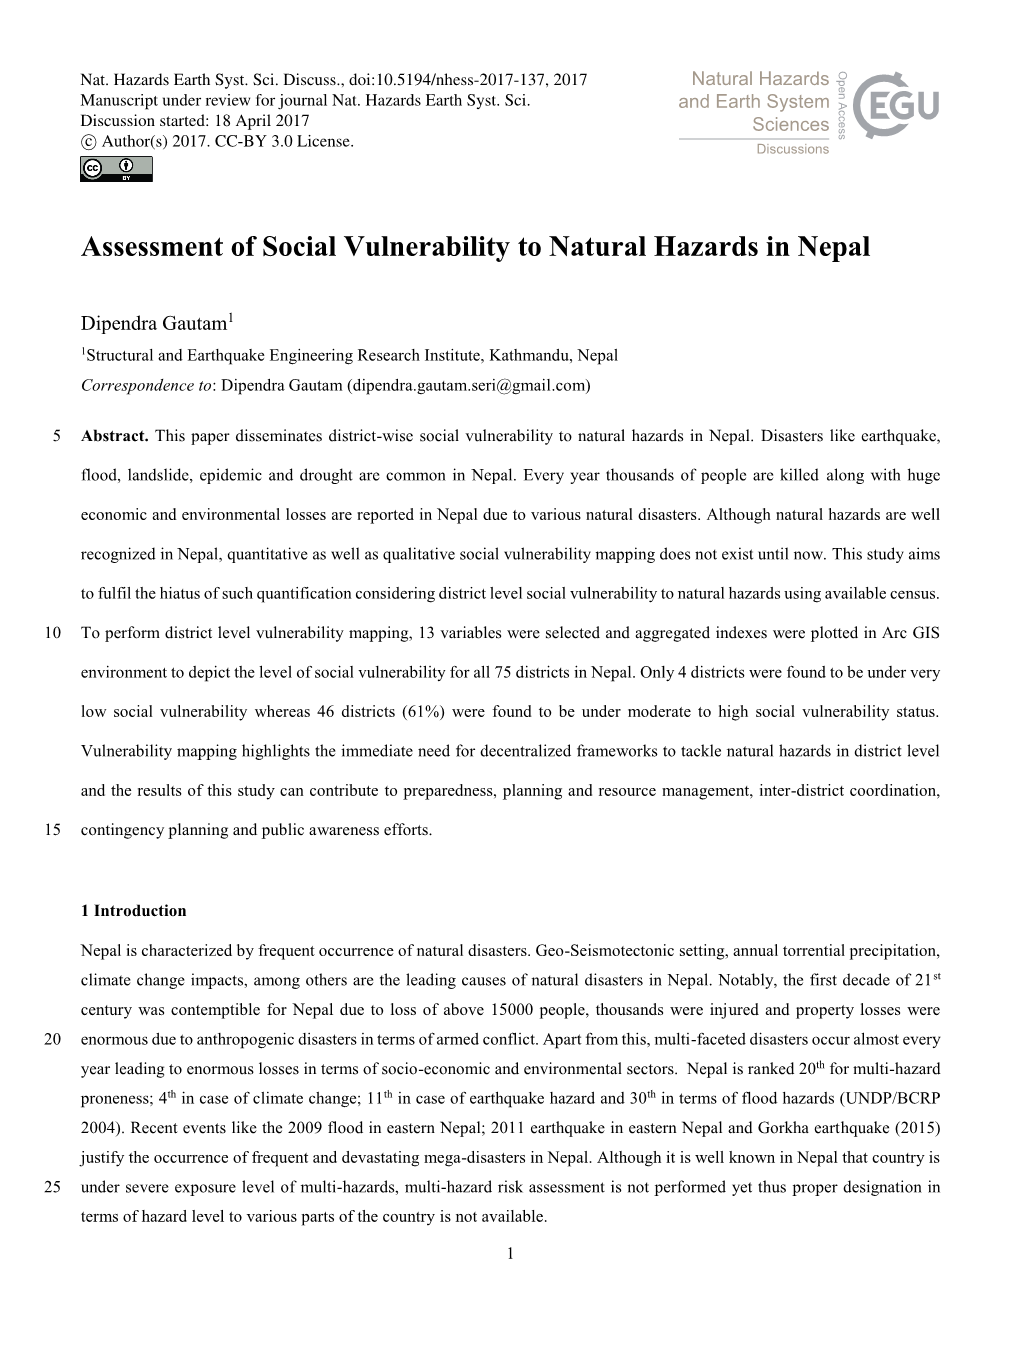 Assessment of Social Vulnerability to Natural Hazards in Nepal